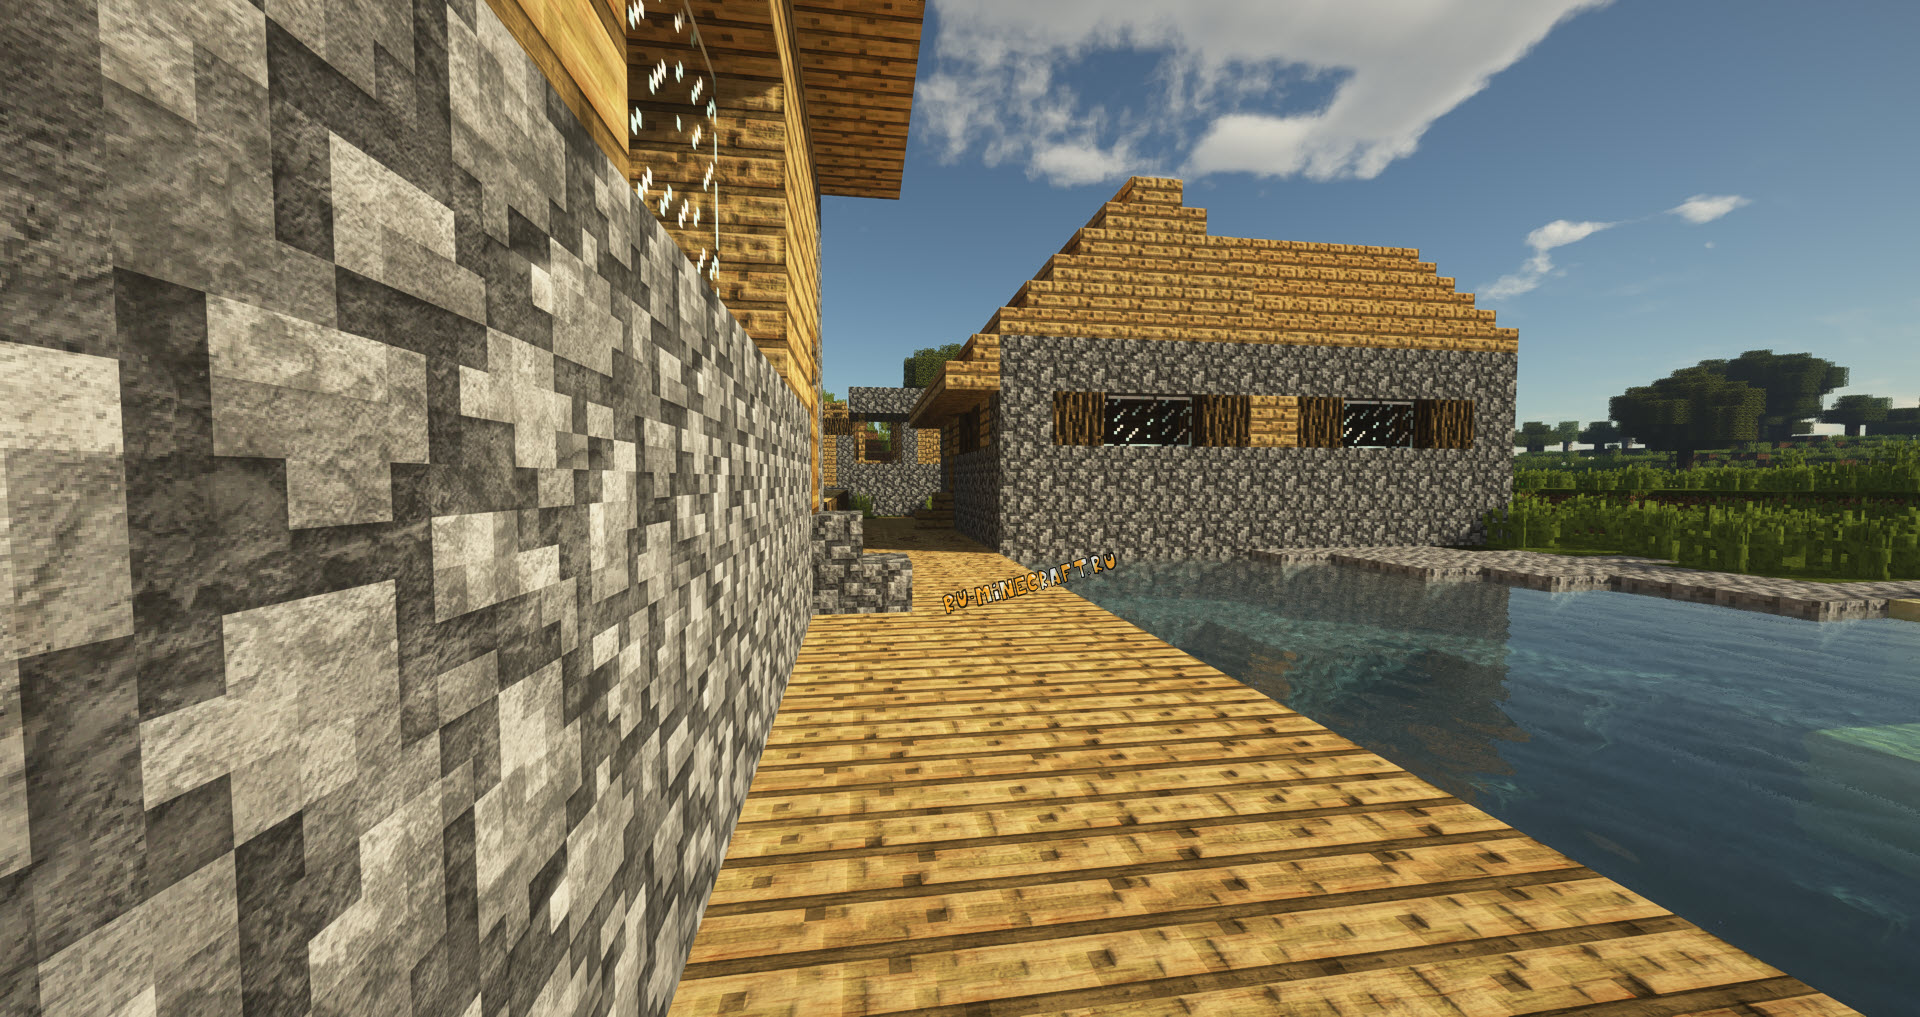 realistico texture pack 1.12.2 full free